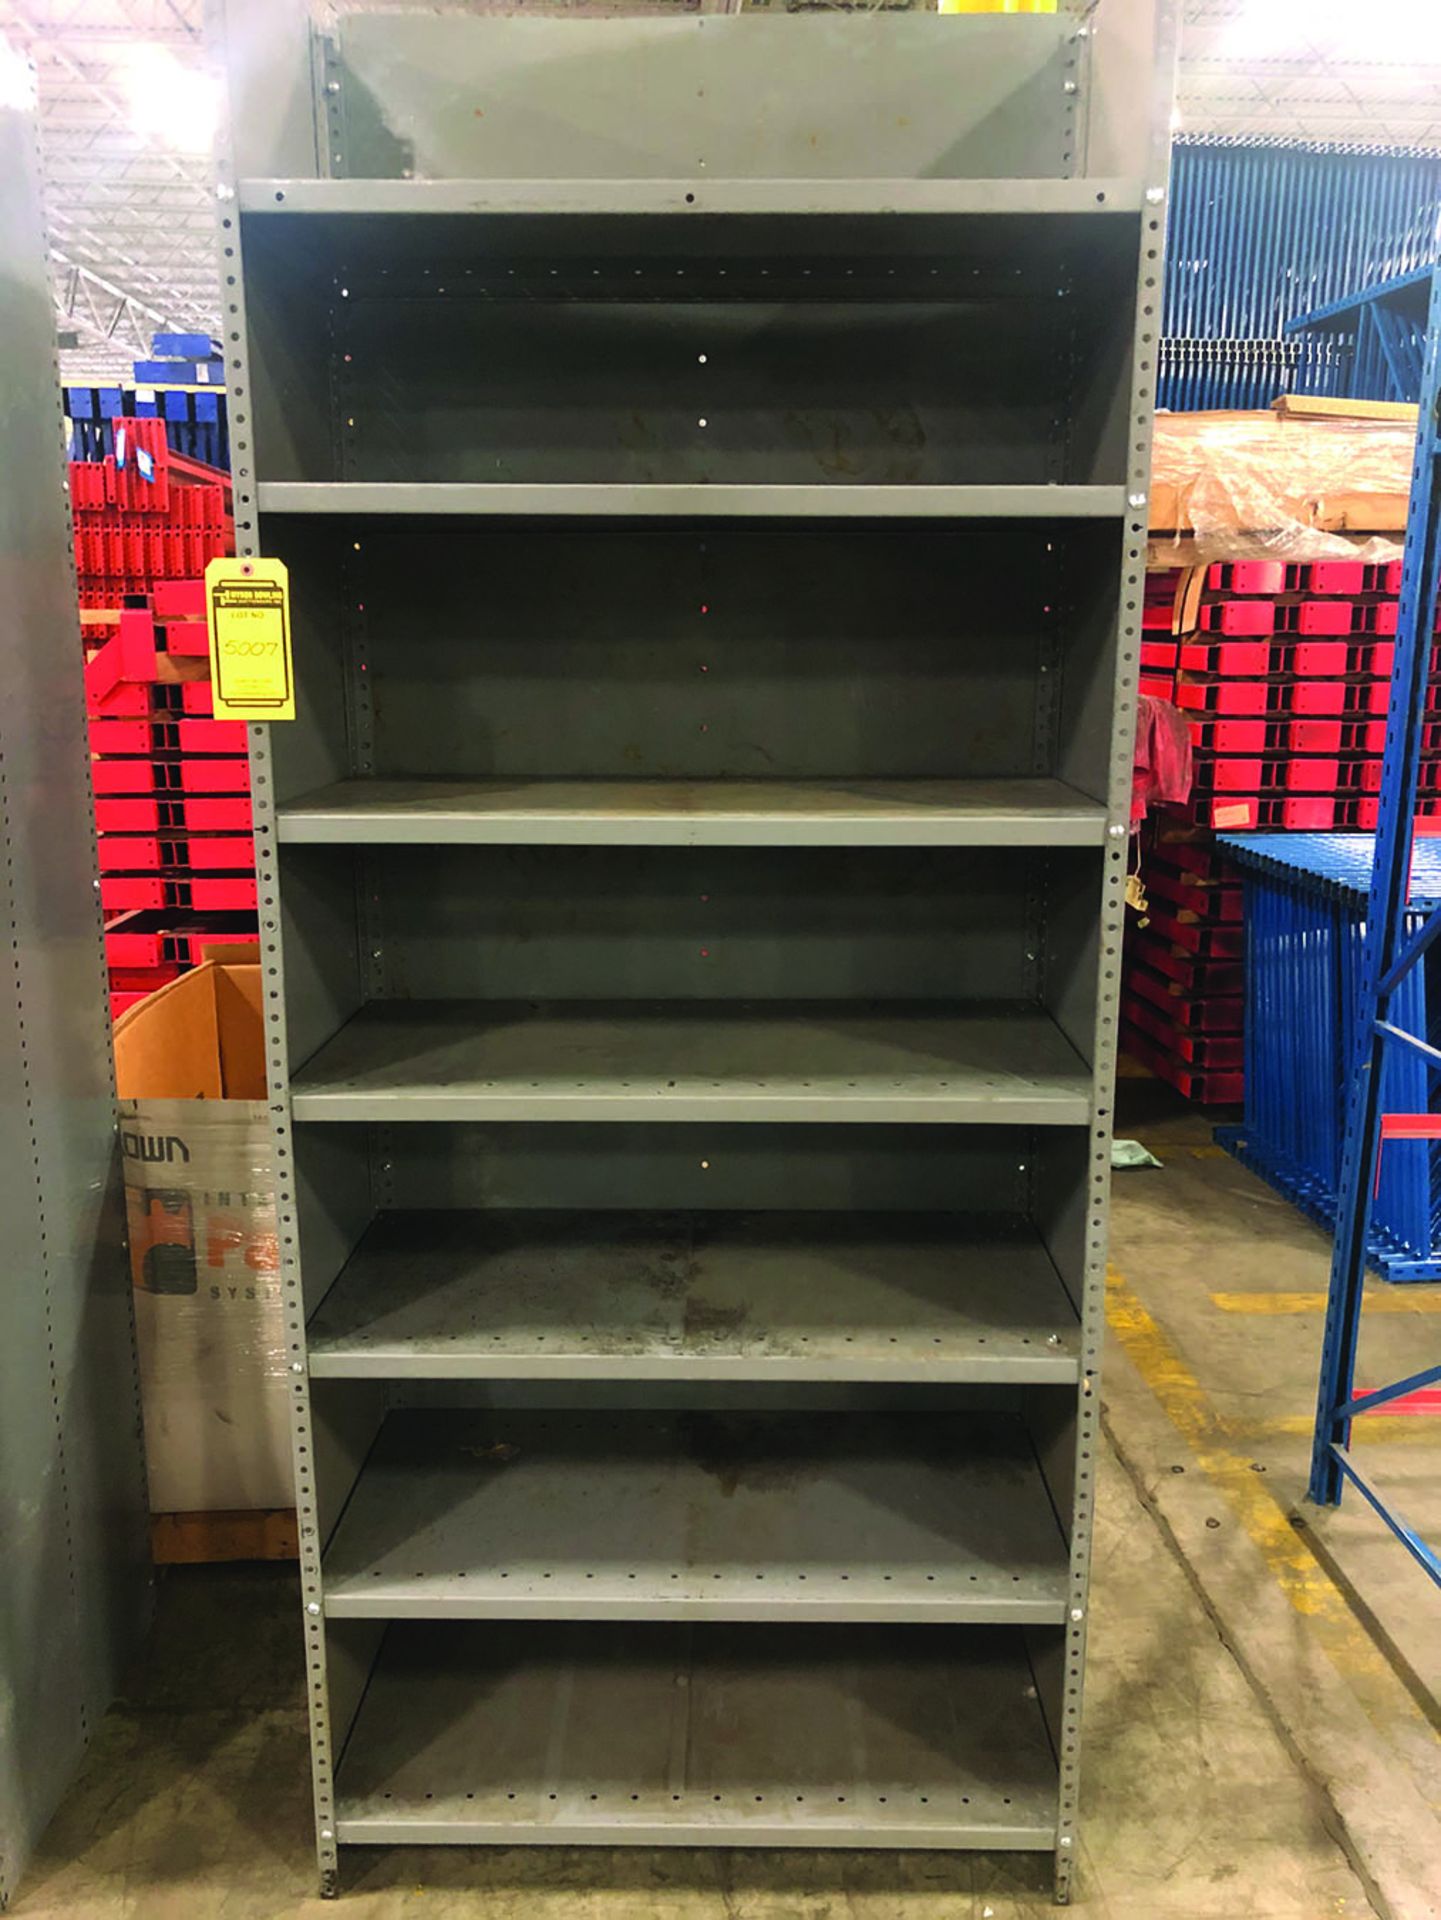 SECTION OF 36''W X 18''D X 87''H BOLT-TOGETHER SHELVING W/7 SHELF LEVELS/BAY, COLOR: GRAY, ITEM#